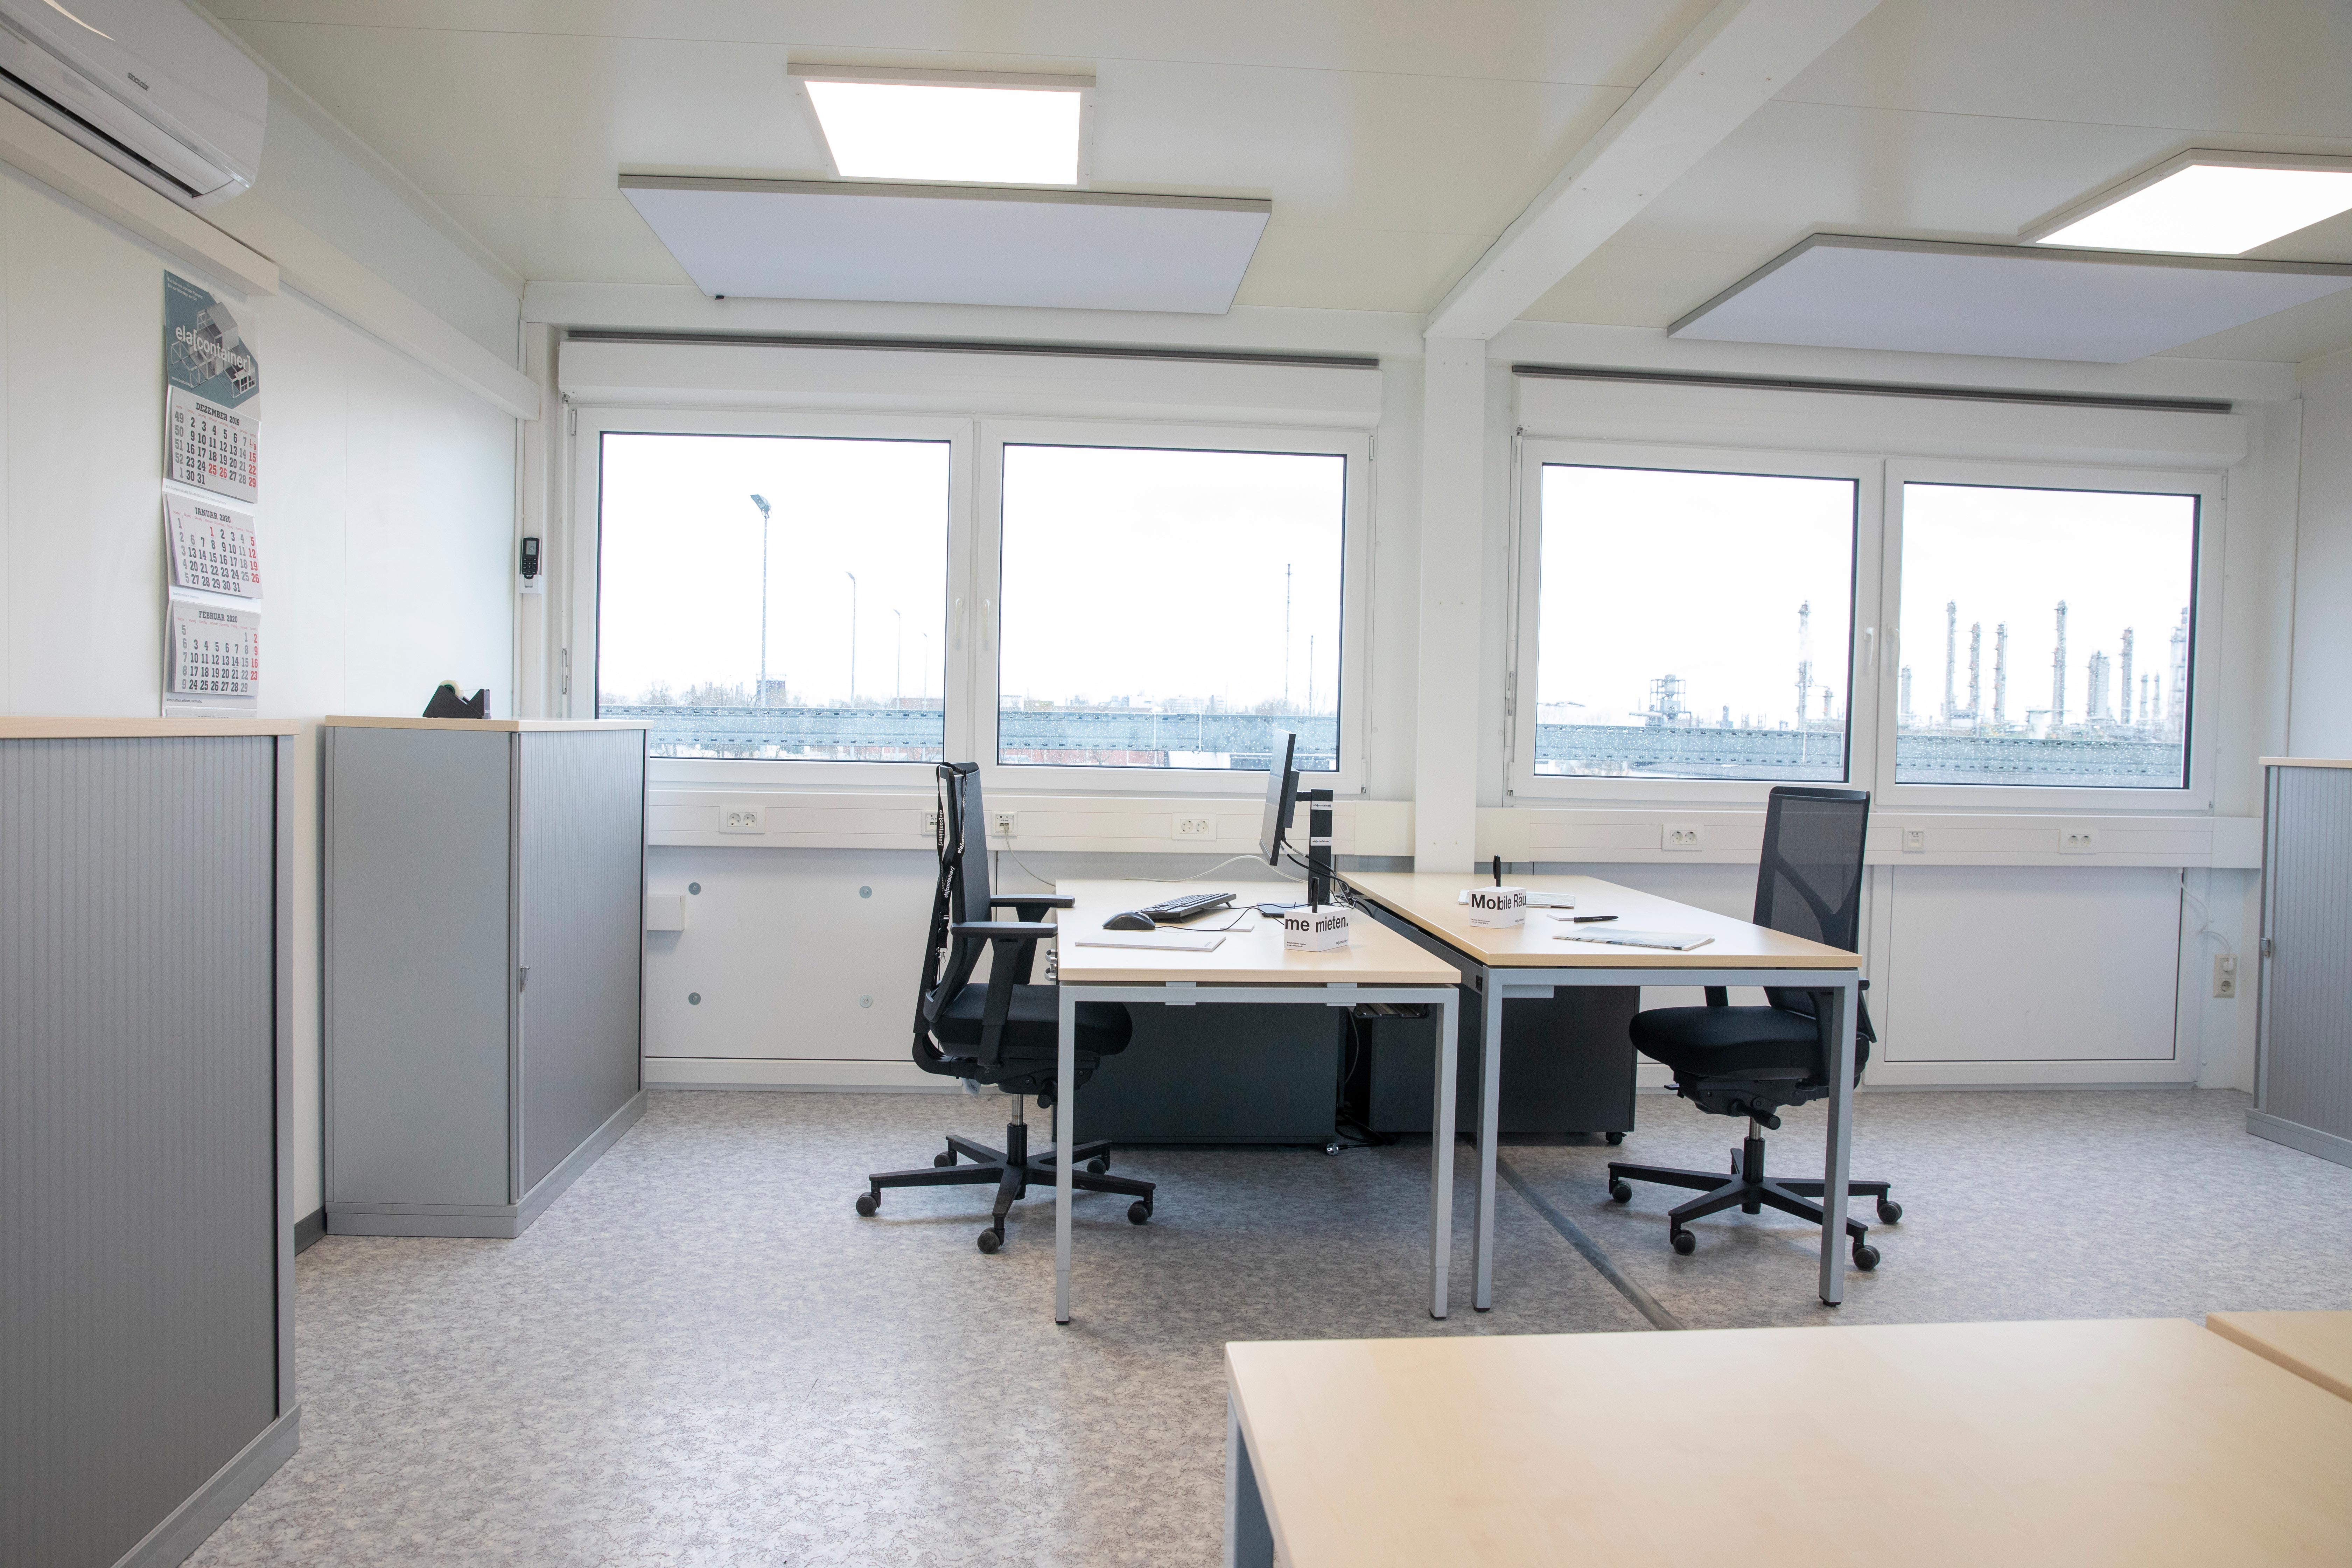 Lighting, electrical equipment and heating: ELA also supplied the basic equipment for the work spaces